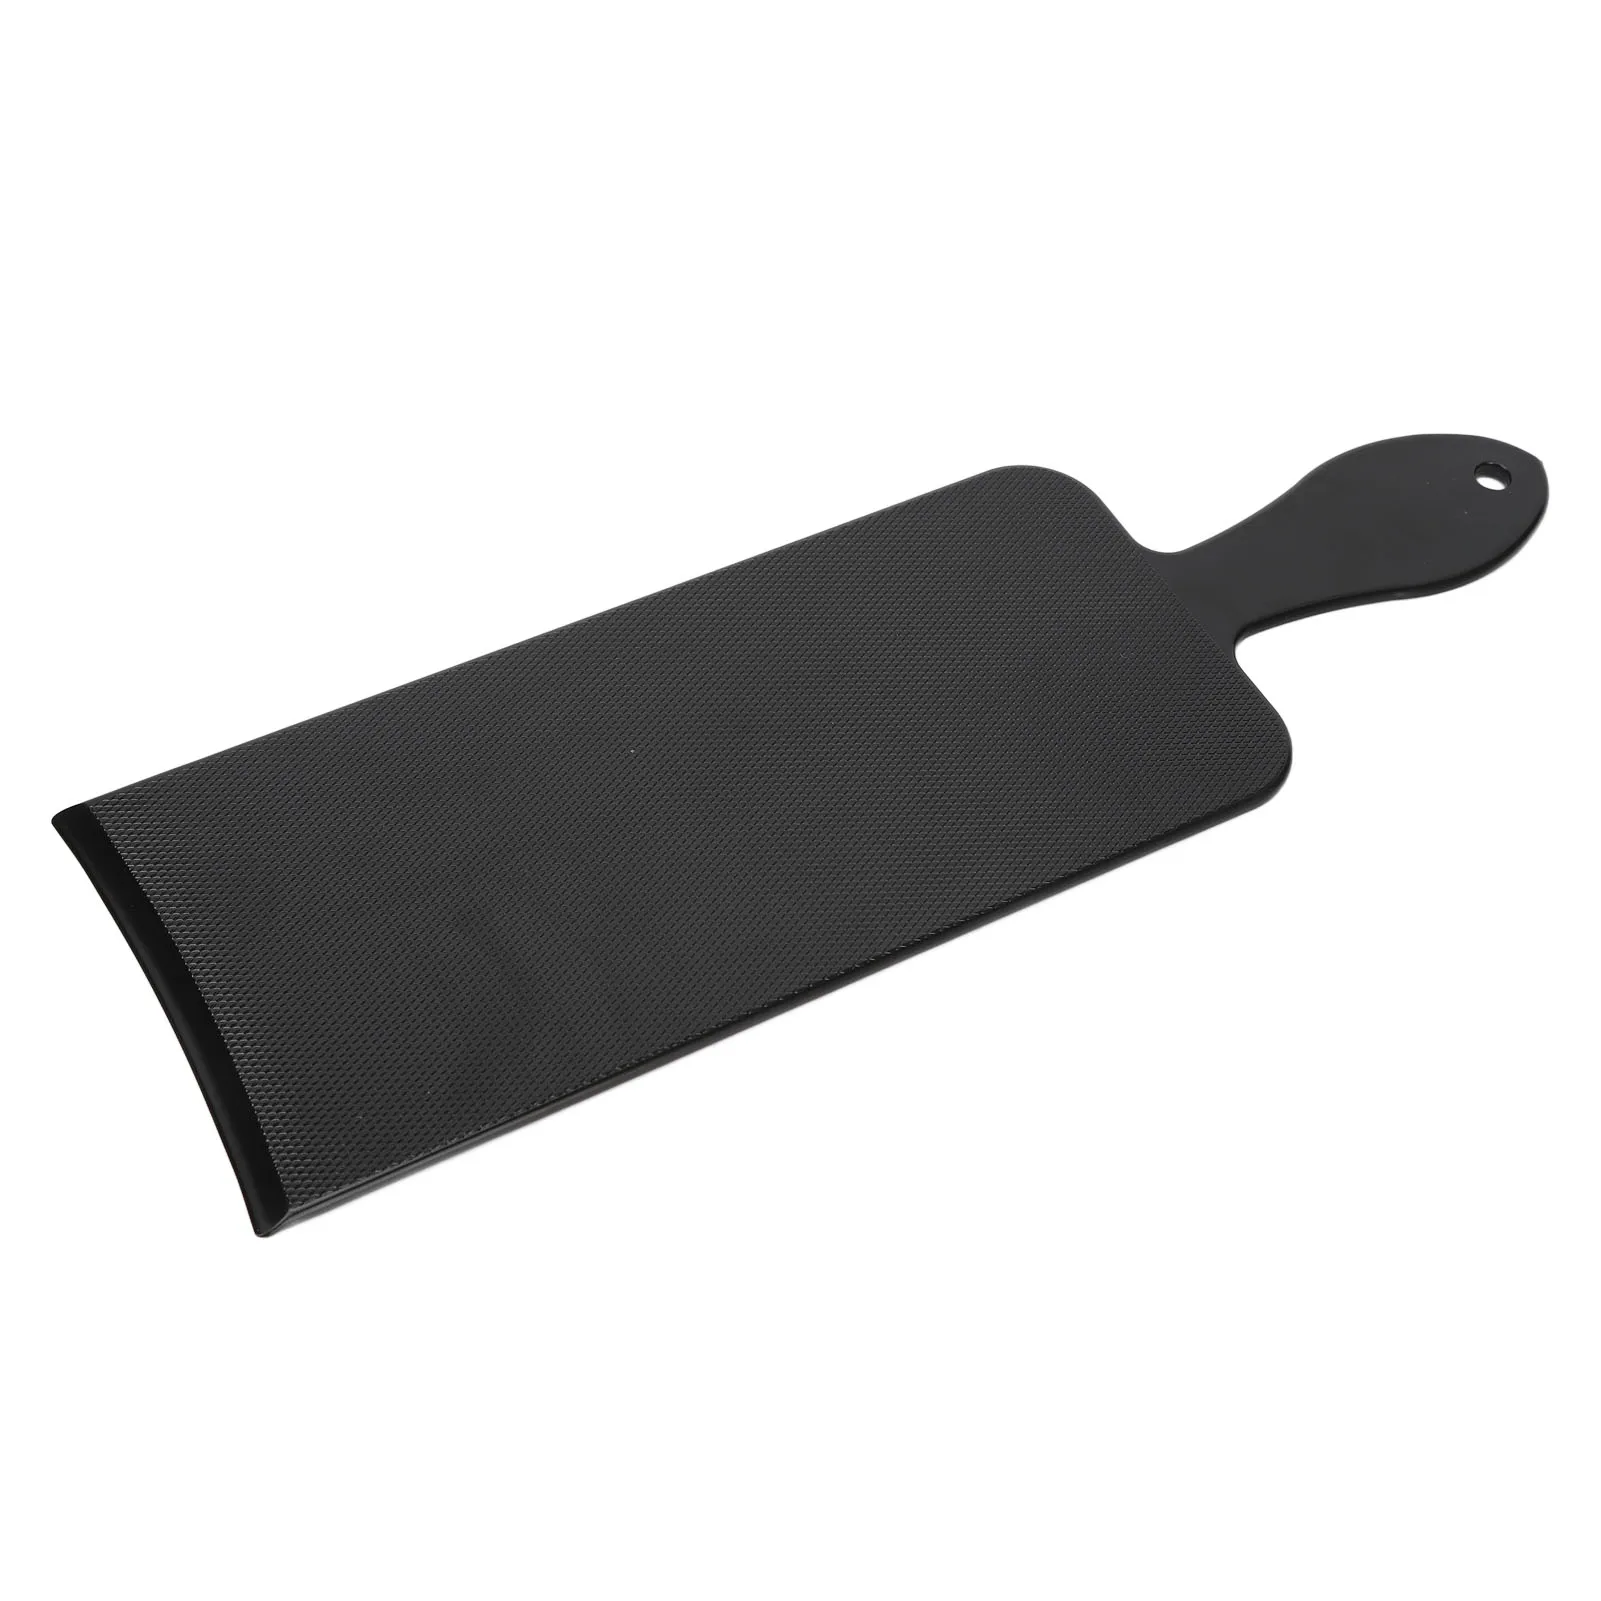 

Highlighting Board Professional Portable Frosted Handle Coloring Hair Dye Paddle for Hair Salon for Hair Stylist